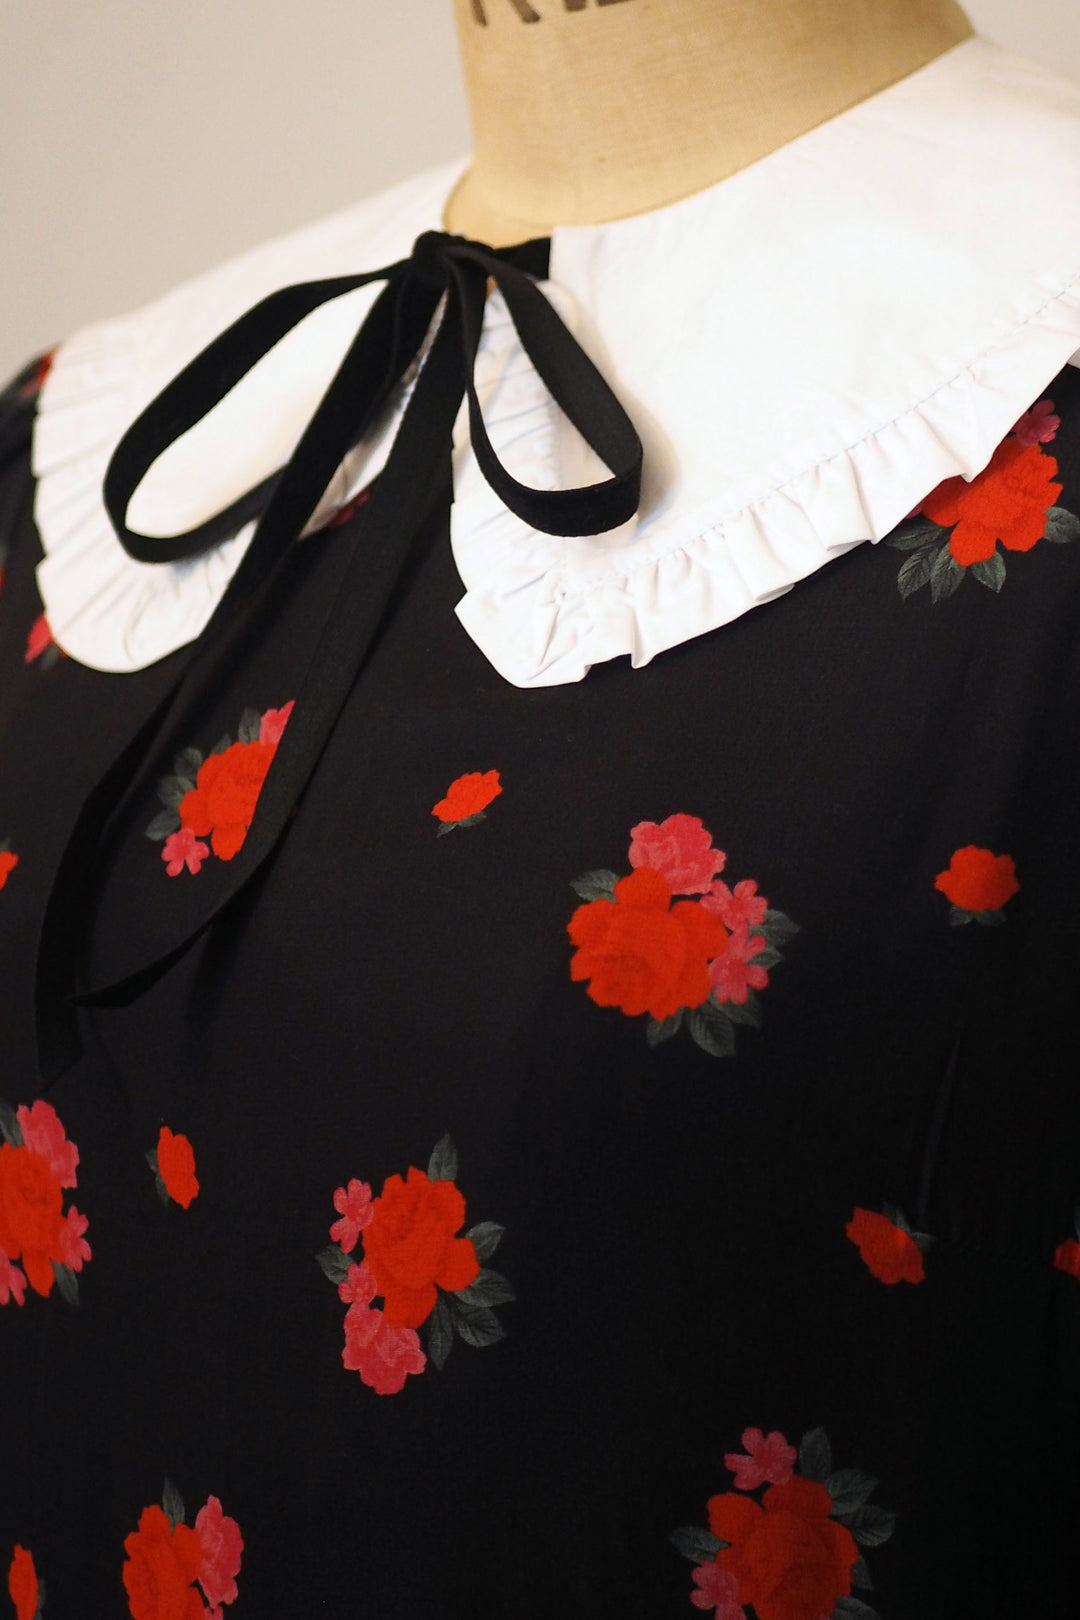 Marianne 'Rosa' with 'Peter Pan' Collar